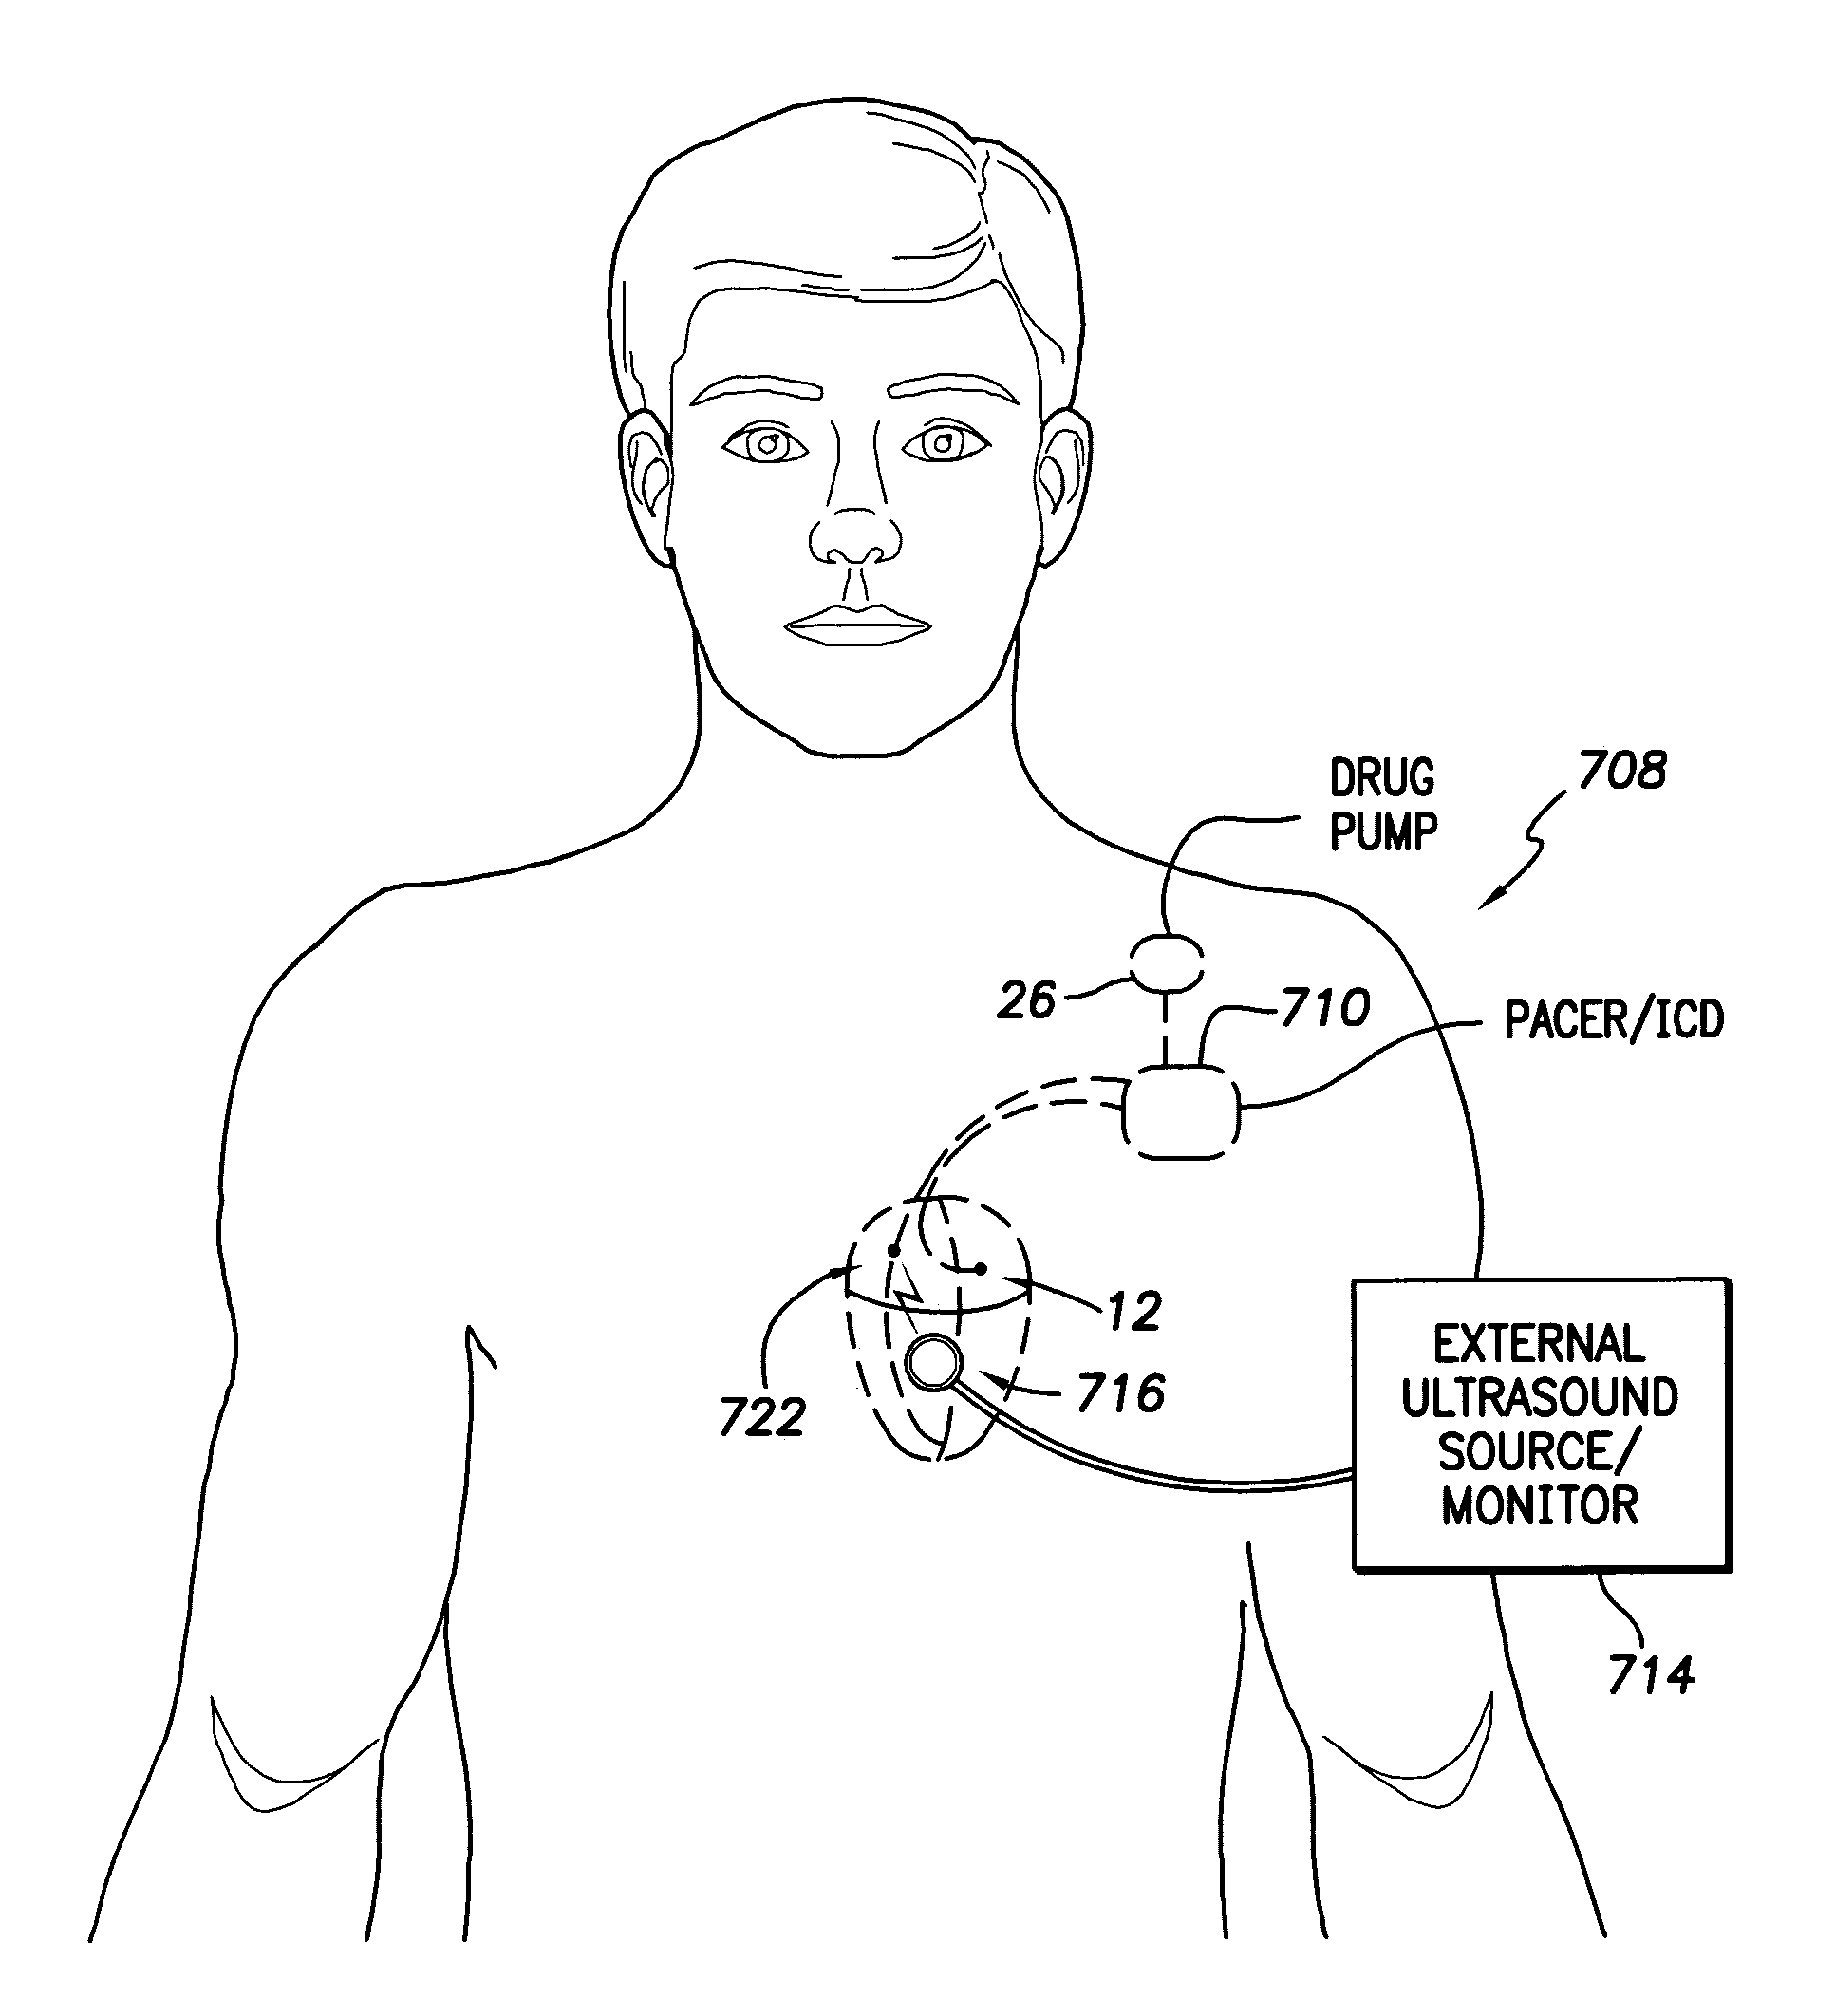 System and method for measuring cardiac output via thermal dilution using an implantable medical device with an external ultrasound power delivery system